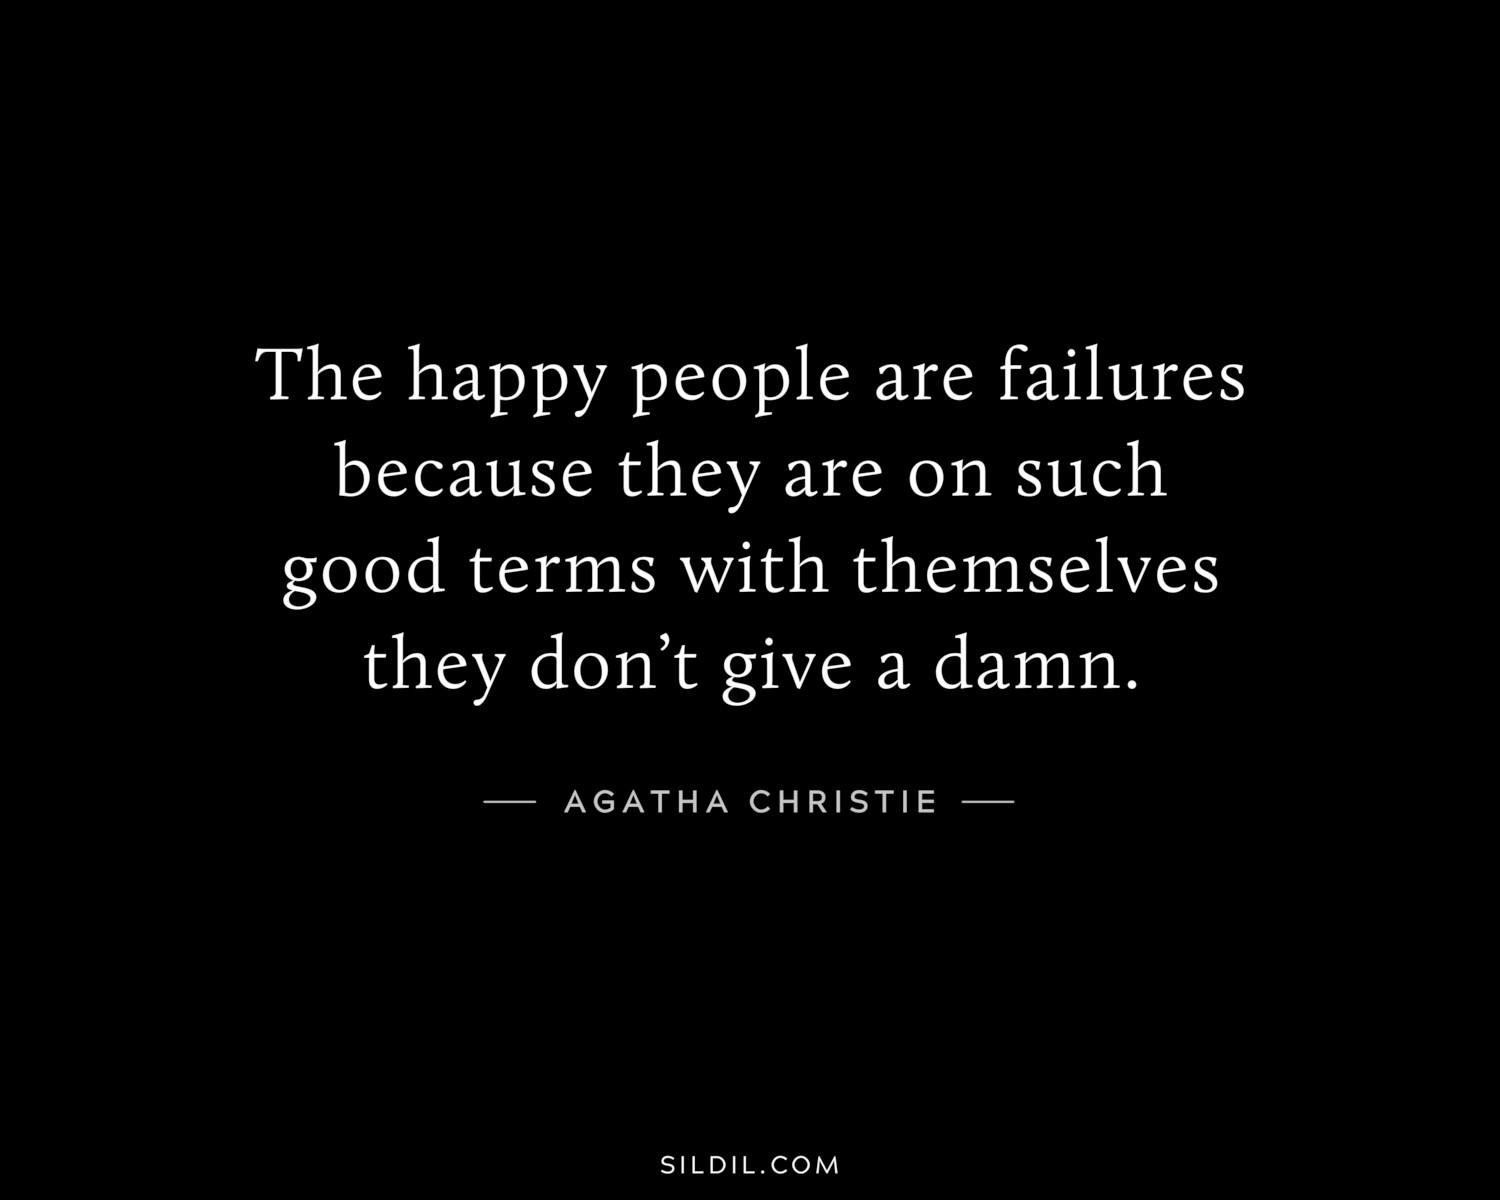 The happy people are failures because they are on such good terms with themselves they don’t give a damn.